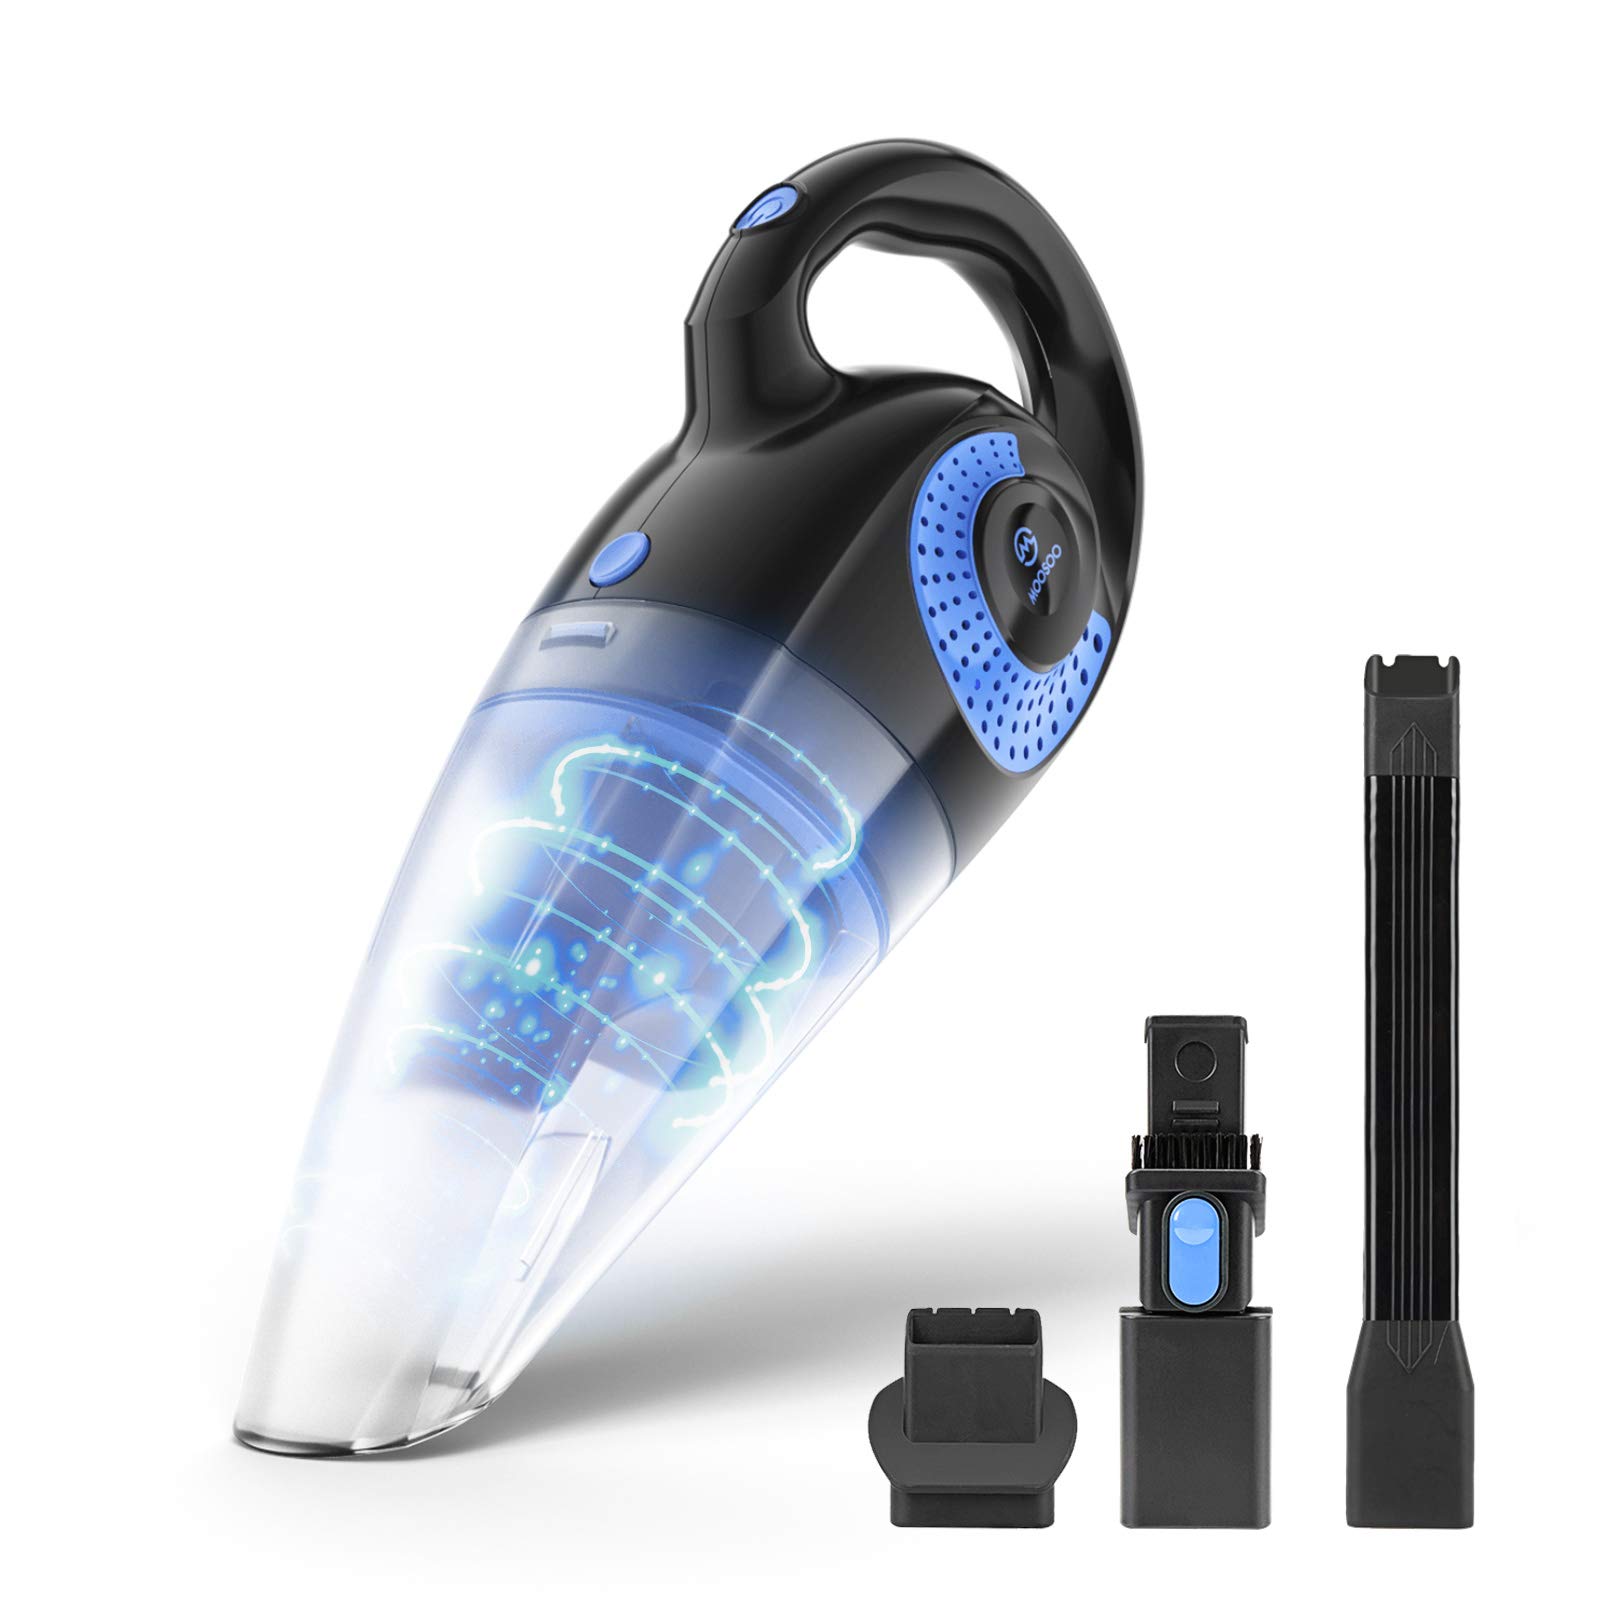 Moosoo Strong Suction handheld Vacuum Cleaner, Cordless Hand Vacuum, Rechargeable Handy Vac for Car & Pet Hair - image 1 of 7